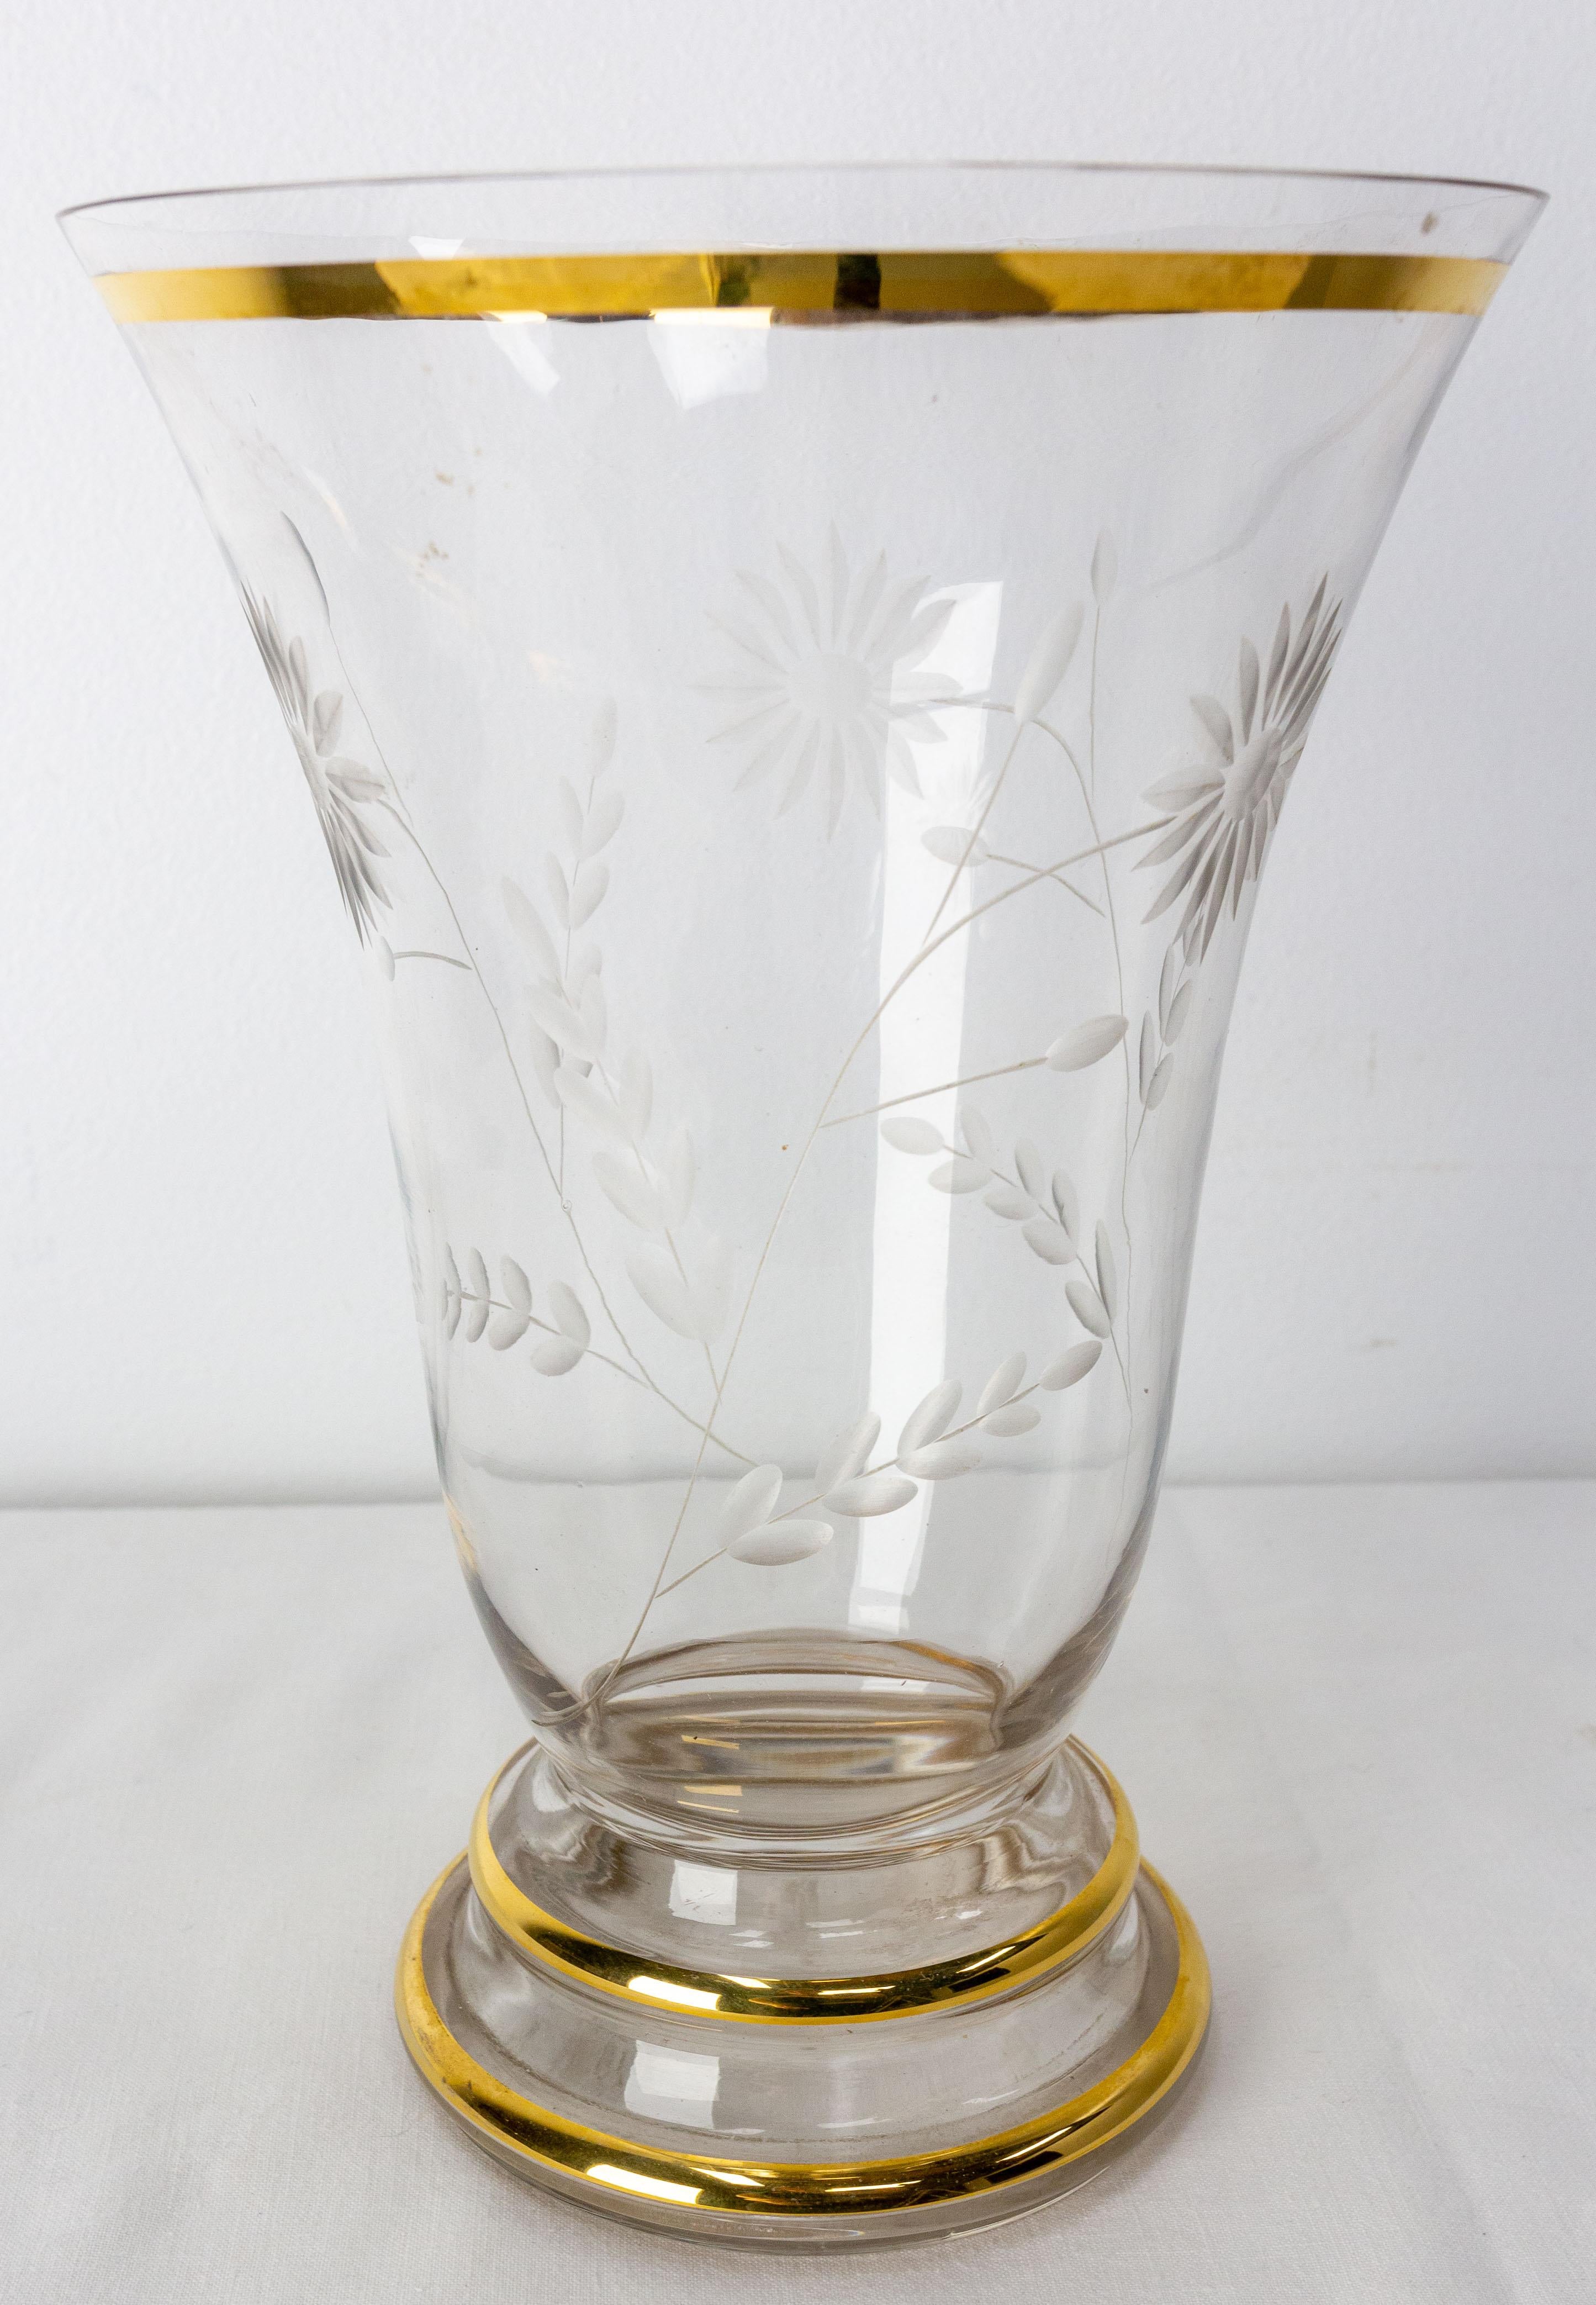 Vintage vase typical of the sixties.
Gilded glass with engraved daisy flowers.
French circa 1960
Very good condition.

Shipping:
Diam 16 H 23.5 cm 0.6 kg.